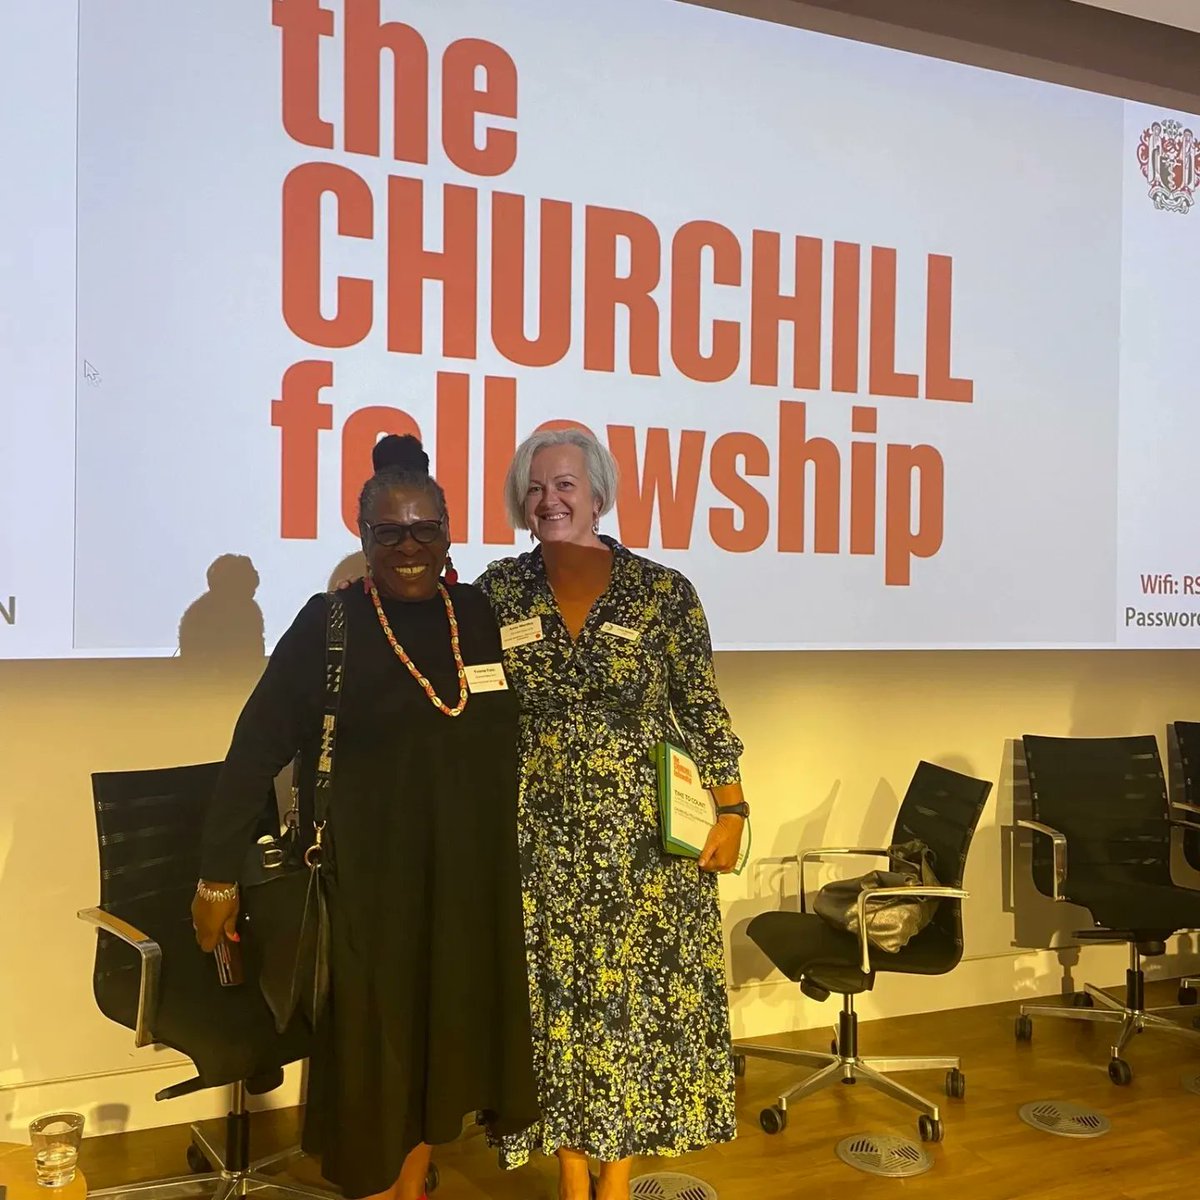 Last week, Yvonne Field OBE shared her story of the impact of her Churchill Fellowship with the new 2023 Fellows.

Around 120 new Fellows along with Churchill Trust staff and trustees were inspired by Yvonne's story.

#ConnectAndInspire2023